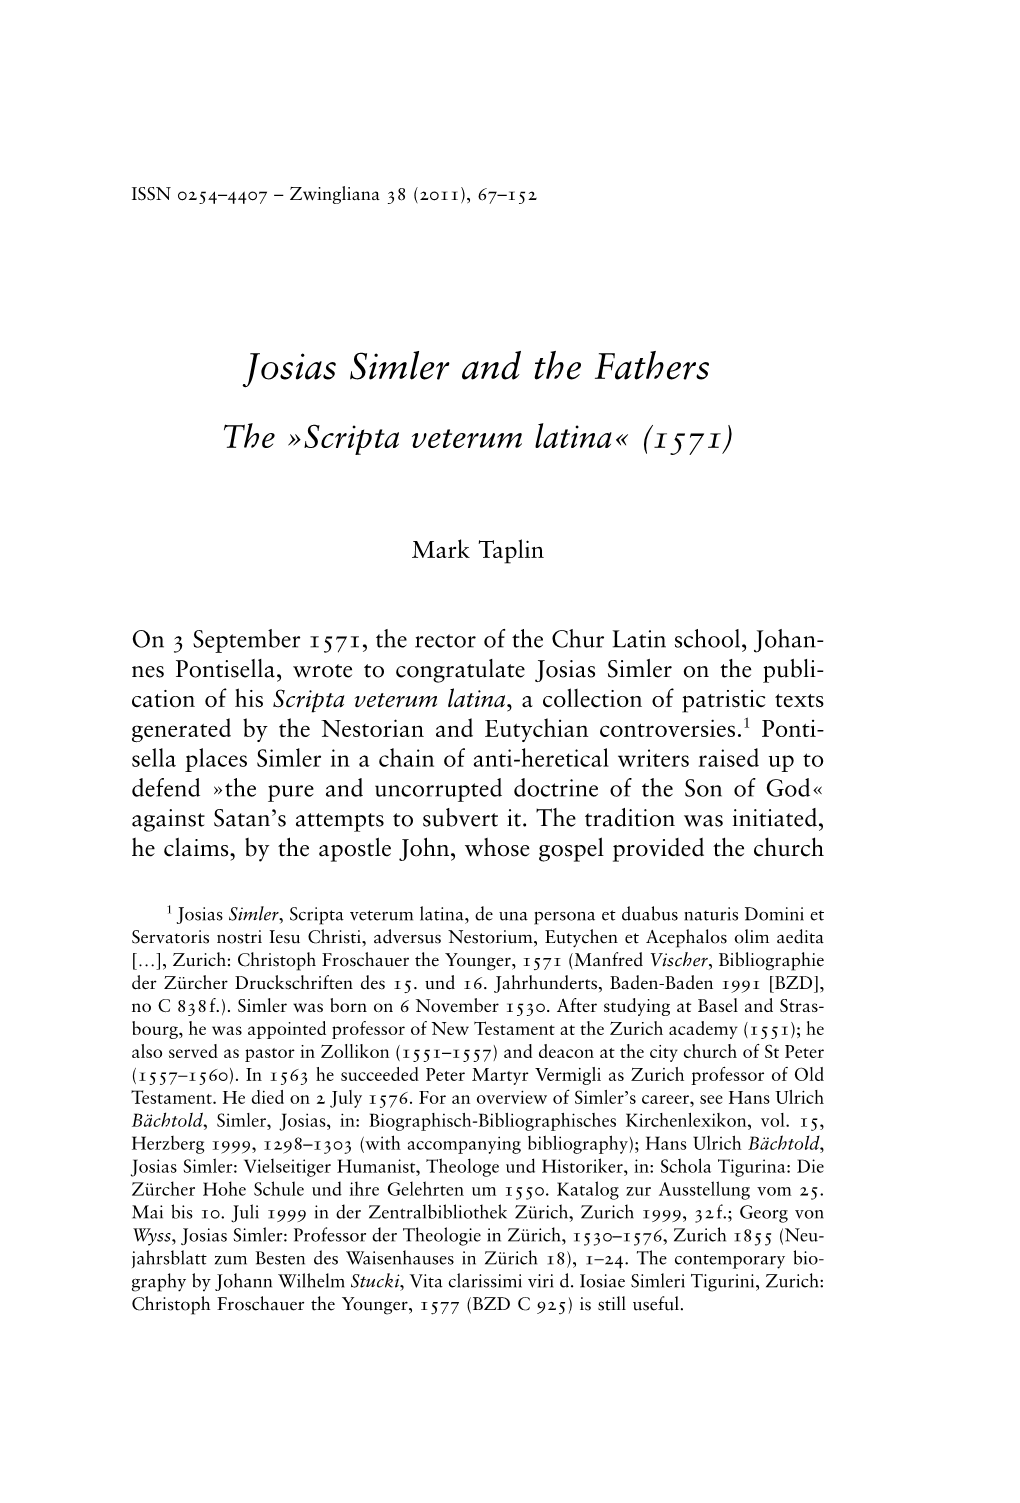 Josias Simler and the Fathers